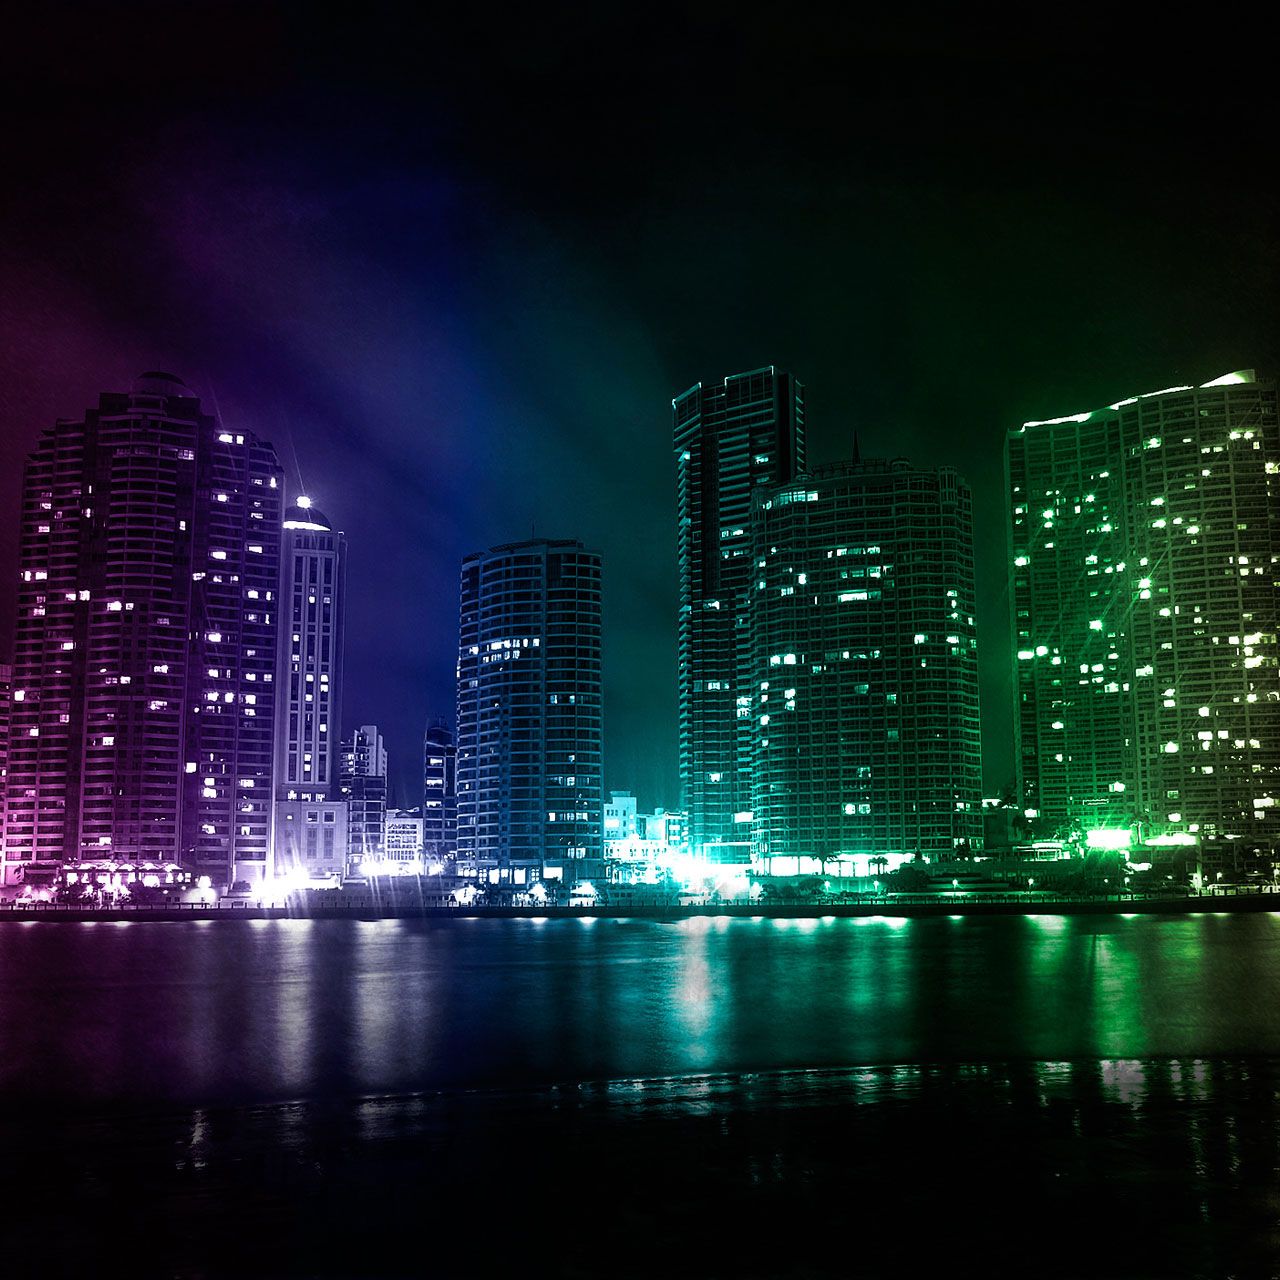 Colorful City T Mobile G Slate 4g wallpaper. Tablet wallpaper and background